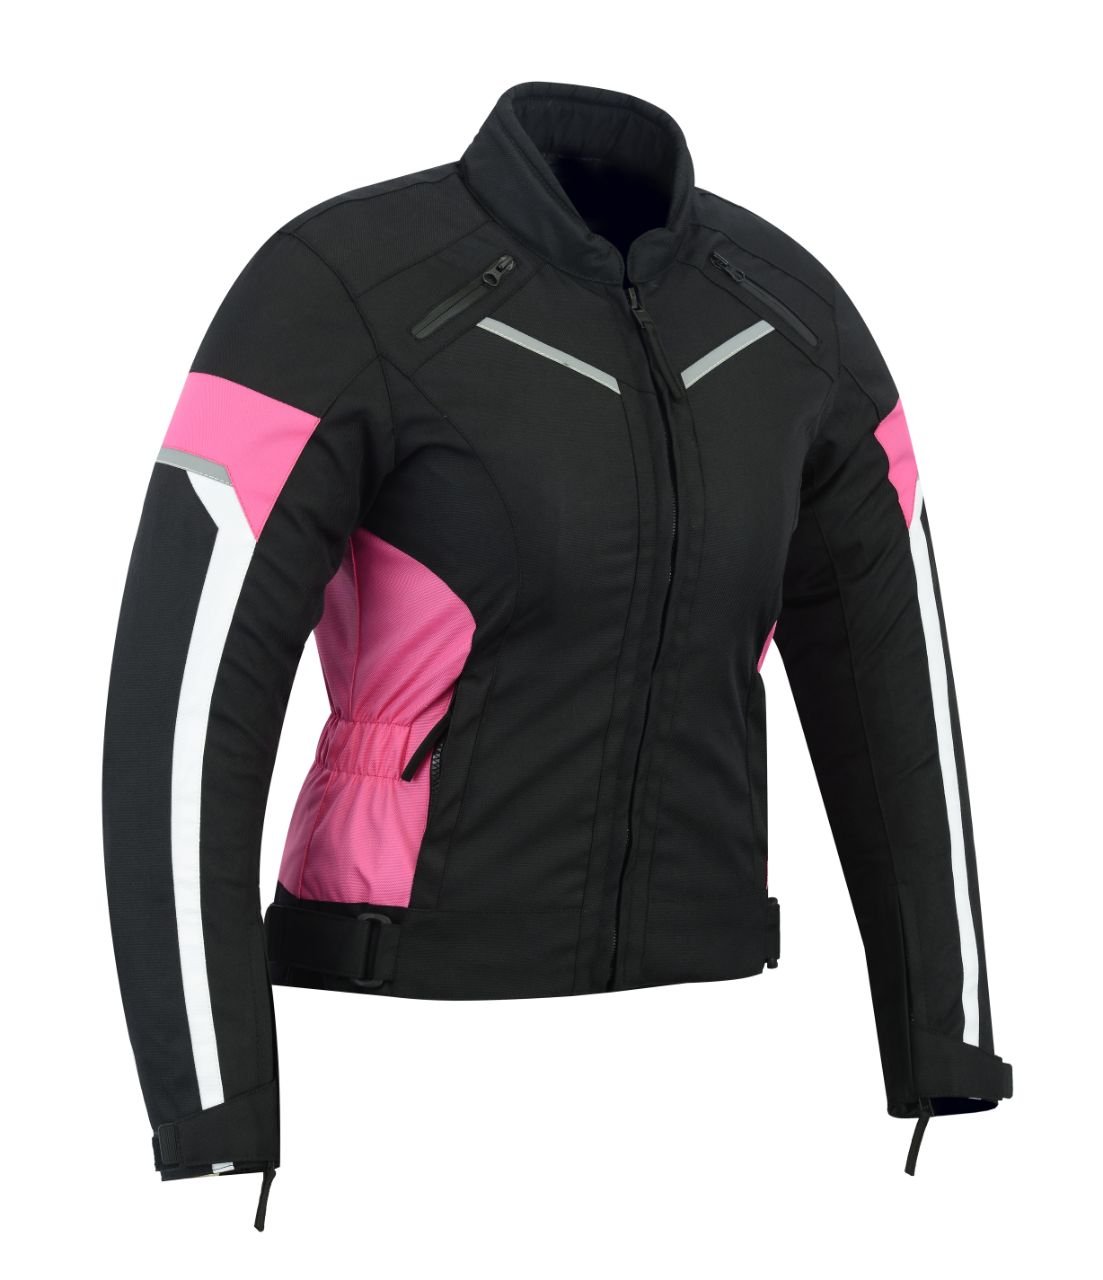 WOMENS MOTORCYCLE ARMORED HIGH PROTECTION WITH ARMOR WATERPROOF | Moto Apparels